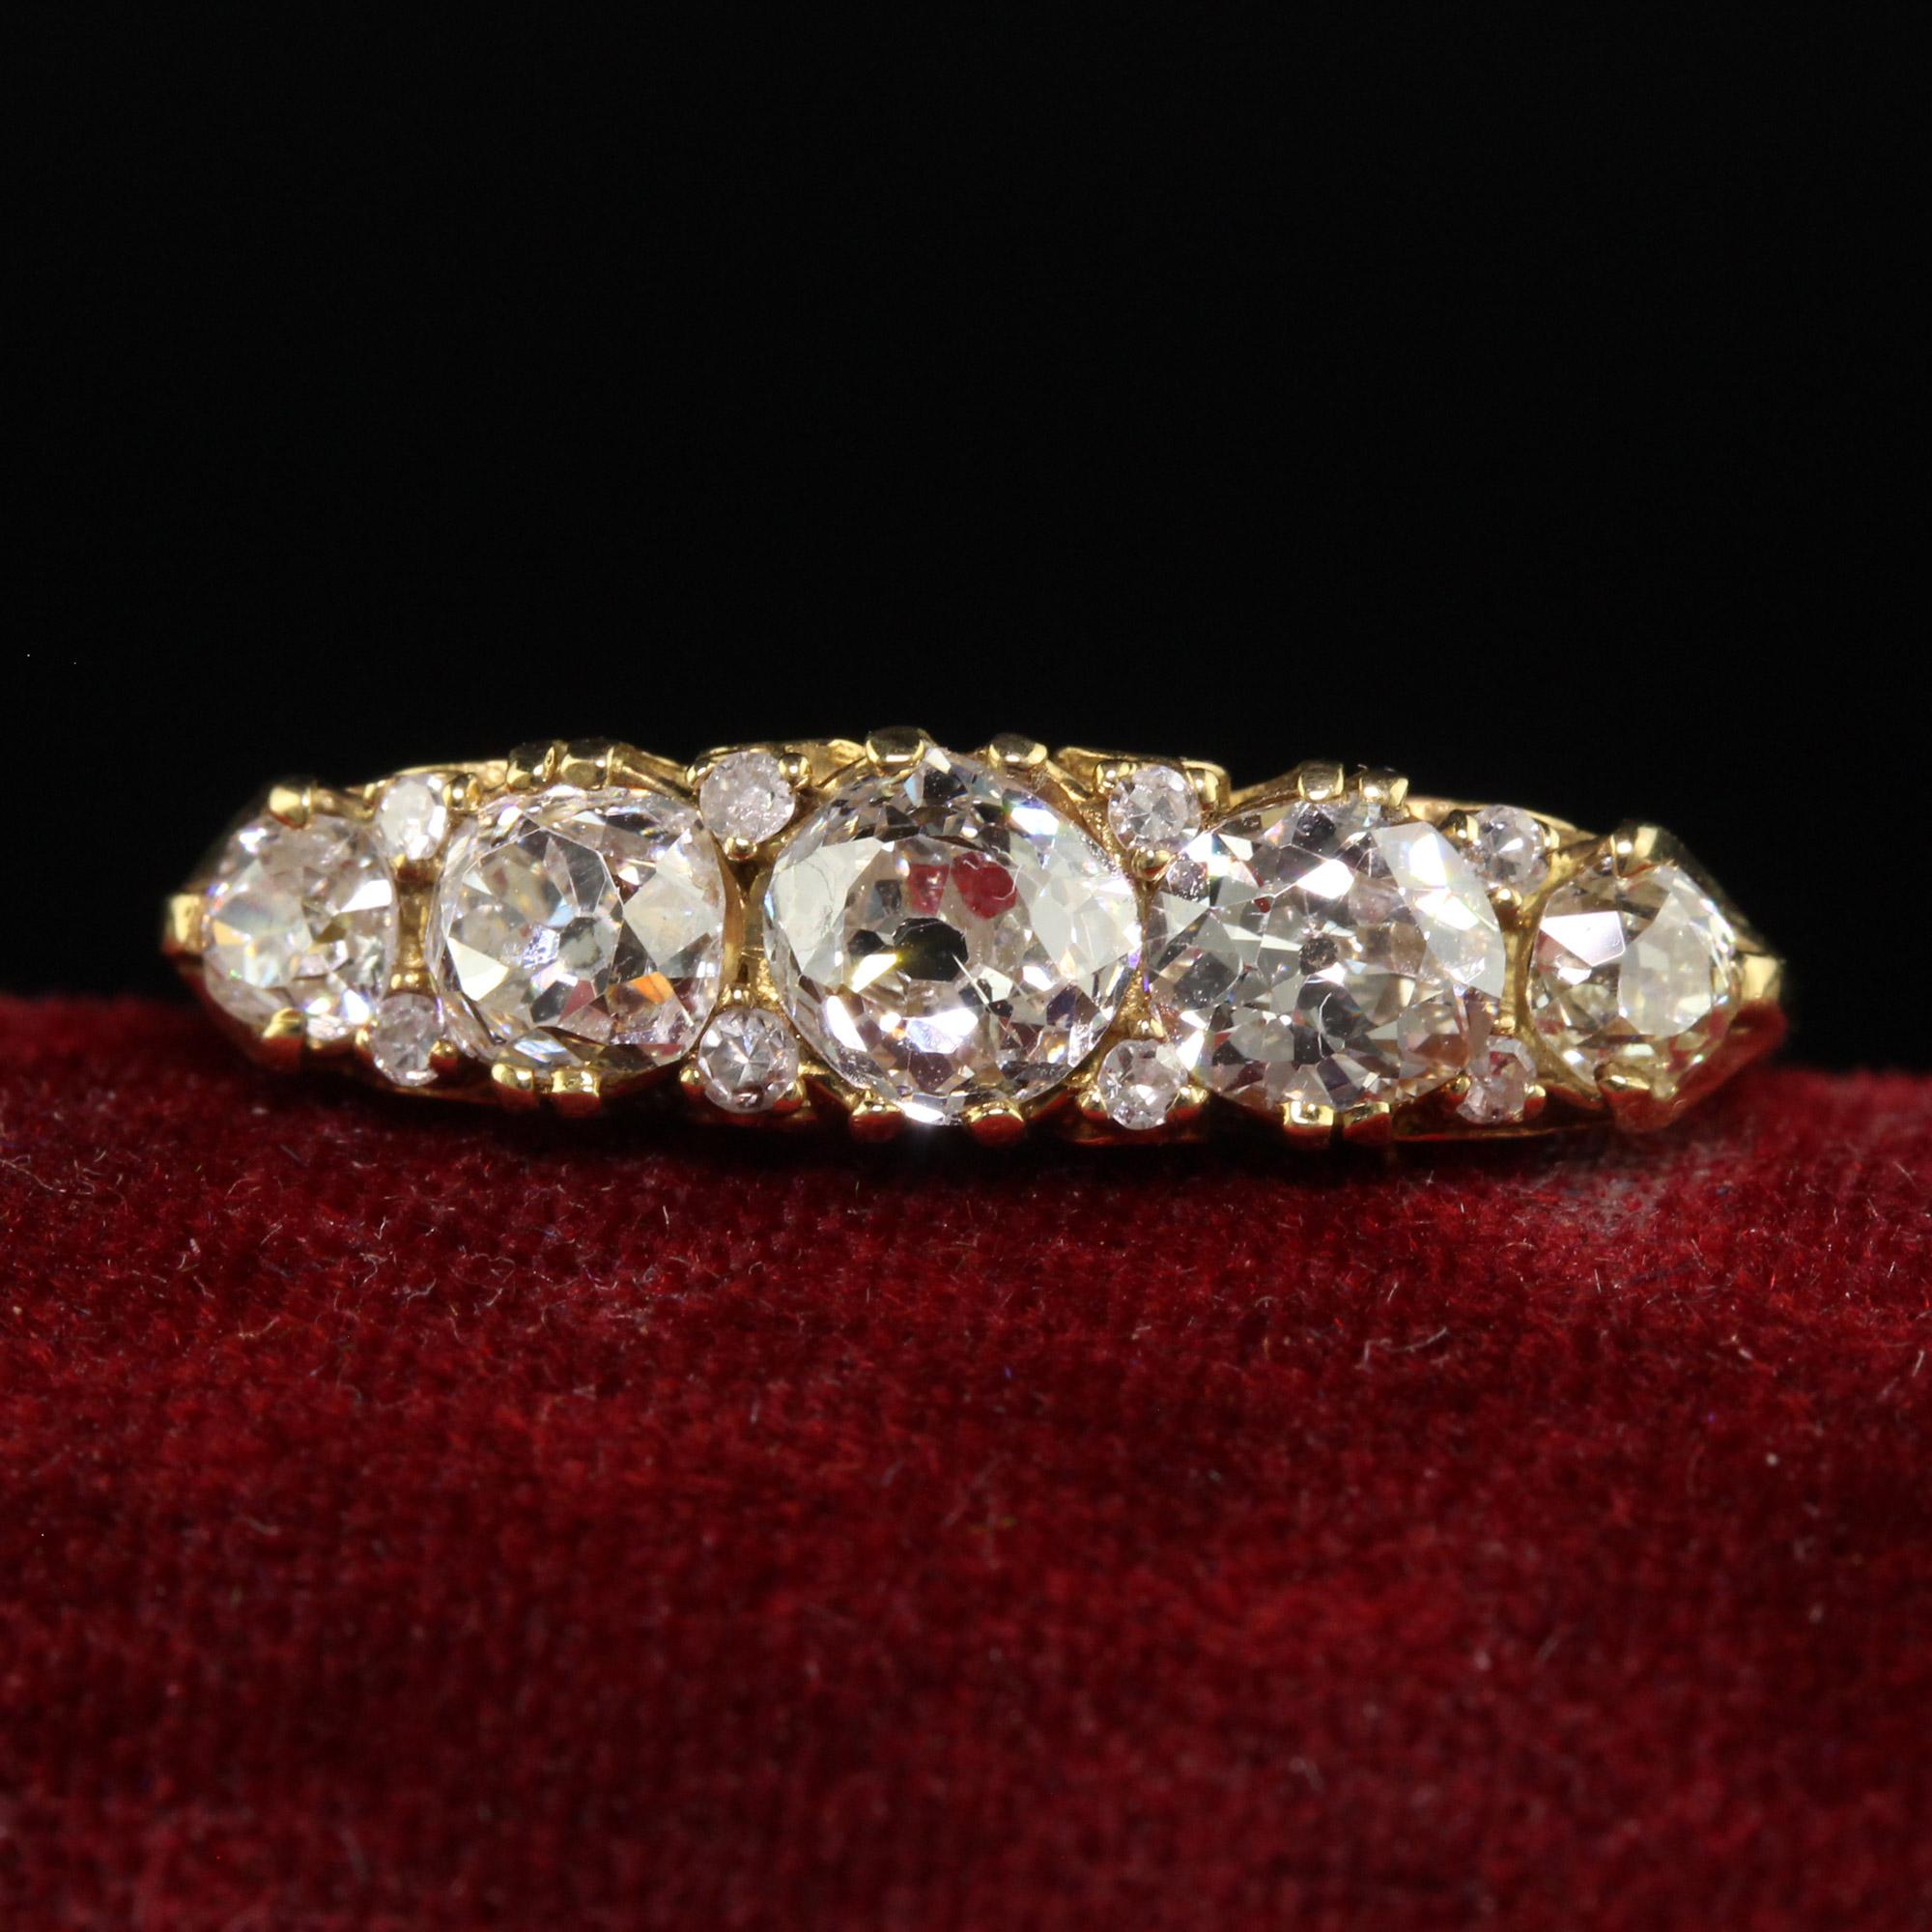 Beautiful Victorian Style 18K Yellow Gold Old Mine Diamond Five Stone Ring. This gorgeous Victorian Style old mine diamond ring is crafted in 18k yellow gold. The top of the ring has gorgeous five chunky old mine cut diamonds with smaller diamonds